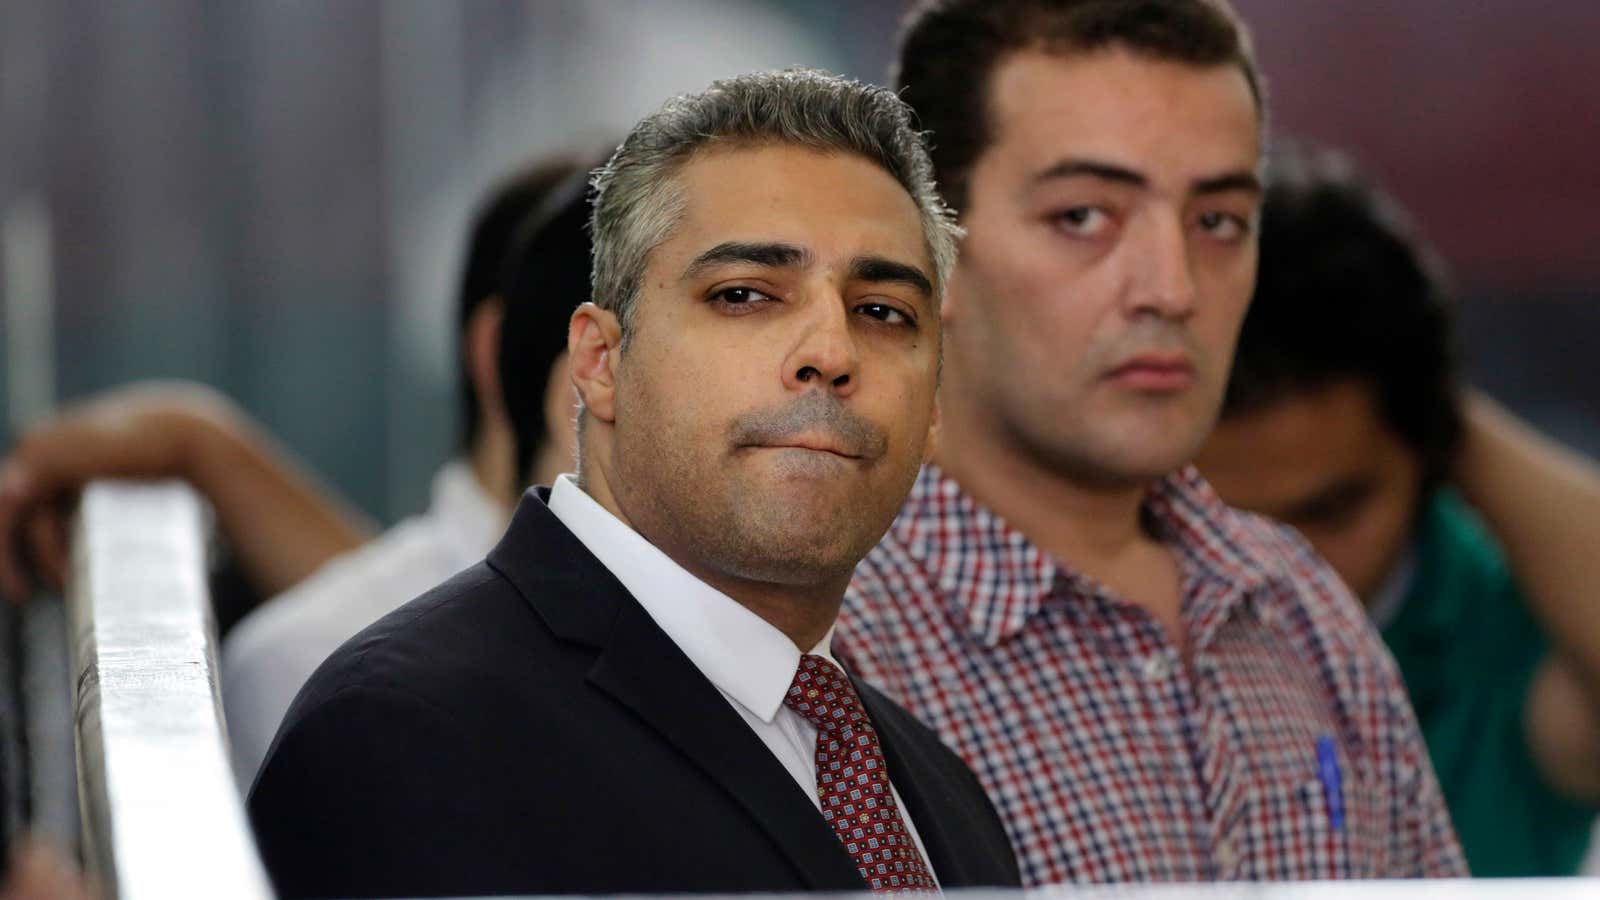 Canadian Al-Jazeera English journalist Mohammed Fahmy, left, and his Egyptian colleague Baher Mohammed listen in a courtroom in Tora prison in Cairo, Egypt back in June.